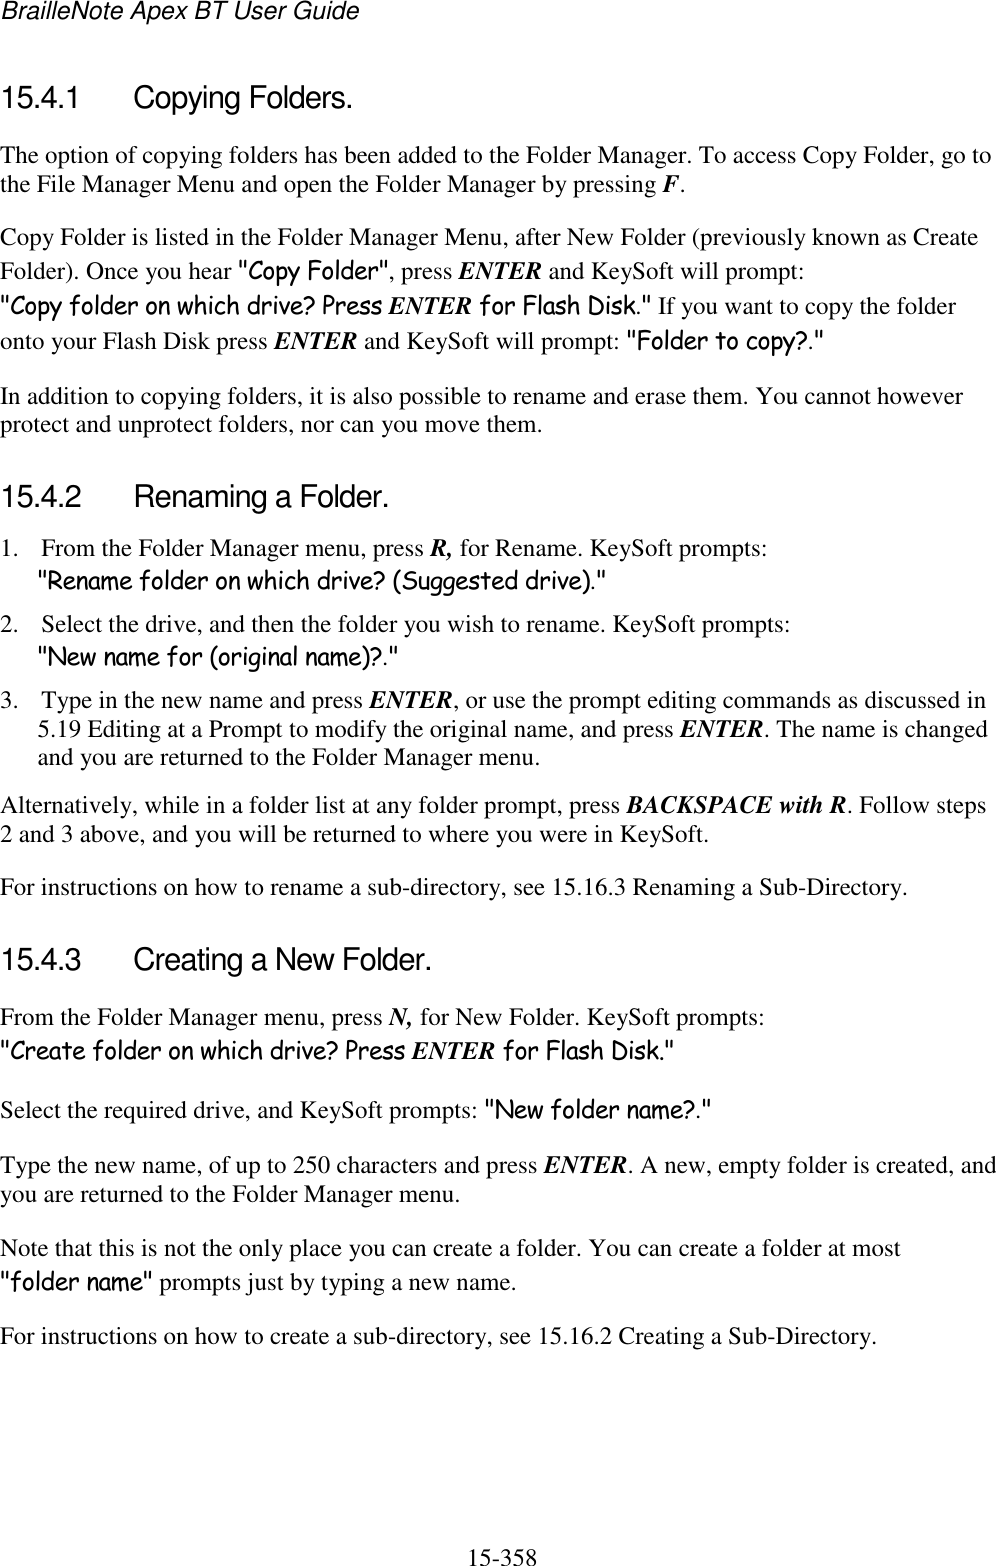 BrailleNote Apex BT User Guide   15-358   15.4.1  Copying Folders. The option of copying folders has been added to the Folder Manager. To access Copy Folder, go to the File Manager Menu and open the Folder Manager by pressing F. Copy Folder is listed in the Folder Manager Menu, after New Folder (previously known as Create Folder). Once you hear &quot;Copy Folder&quot;, press ENTER and KeySoft will prompt: &quot;Copy folder on which drive? Press ENTER for Flash Disk.&quot; If you want to copy the folder onto your Flash Disk press ENTER and KeySoft will prompt: &quot;Folder to copy?.&quot;  In addition to copying folders, it is also possible to rename and erase them. You cannot however protect and unprotect folders, nor can you move them.  15.4.2  Renaming a Folder. 1. From the Folder Manager menu, press R, for Rename. KeySoft prompts: &quot;Rename folder on which drive? (Suggested drive).&quot; 2. Select the drive, and then the folder you wish to rename. KeySoft prompts: &quot;New name for (original name)?.&quot; 3. Type in the new name and press ENTER, or use the prompt editing commands as discussed in 5.19 Editing at a Prompt to modify the original name, and press ENTER. The name is changed and you are returned to the Folder Manager menu. Alternatively, while in a folder list at any folder prompt, press BACKSPACE with R. Follow steps 2 and 3 above, and you will be returned to where you were in KeySoft. For instructions on how to rename a sub-directory, see 15.16.3 Renaming a Sub-Directory.  15.4.3  Creating a New Folder. From the Folder Manager menu, press N, for New Folder. KeySoft prompts: &quot;Create folder on which drive? Press ENTER for Flash Disk.&quot; Select the required drive, and KeySoft prompts: &quot;New folder name?.&quot; Type the new name, of up to 250 characters and press ENTER. A new, empty folder is created, and you are returned to the Folder Manager menu. Note that this is not the only place you can create a folder. You can create a folder at most &quot;folder name&quot; prompts just by typing a new name. For instructions on how to create a sub-directory, see 15.16.2 Creating a Sub-Directory.  